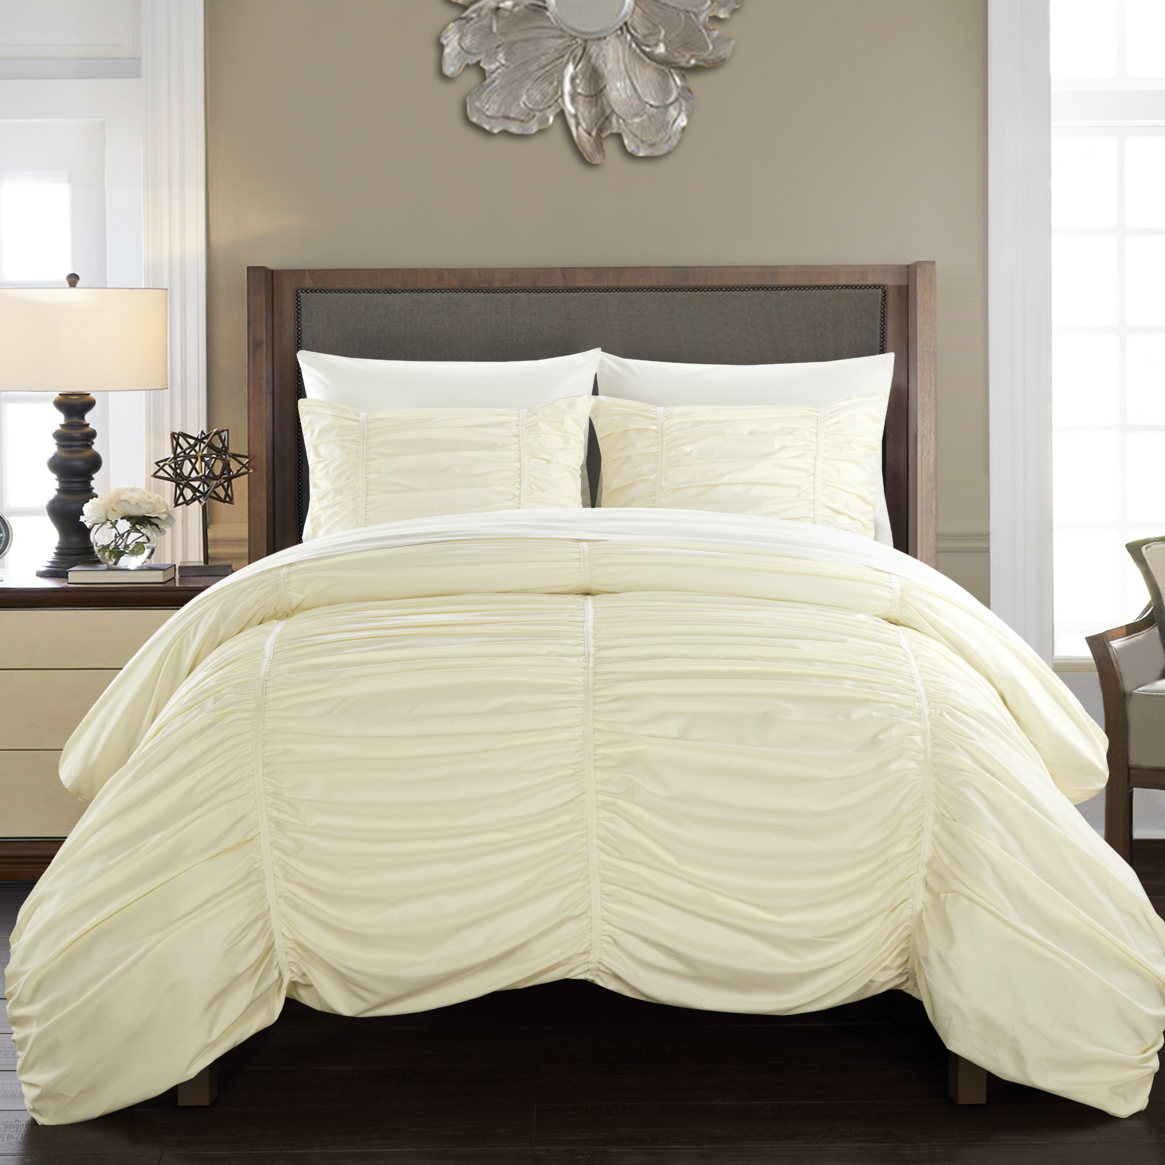 Kleia 7 Or 5 Piece Comforter Set Contemporary Striped Ruched Ruffled Design Bed In A Bag - Beige, Twin X-long